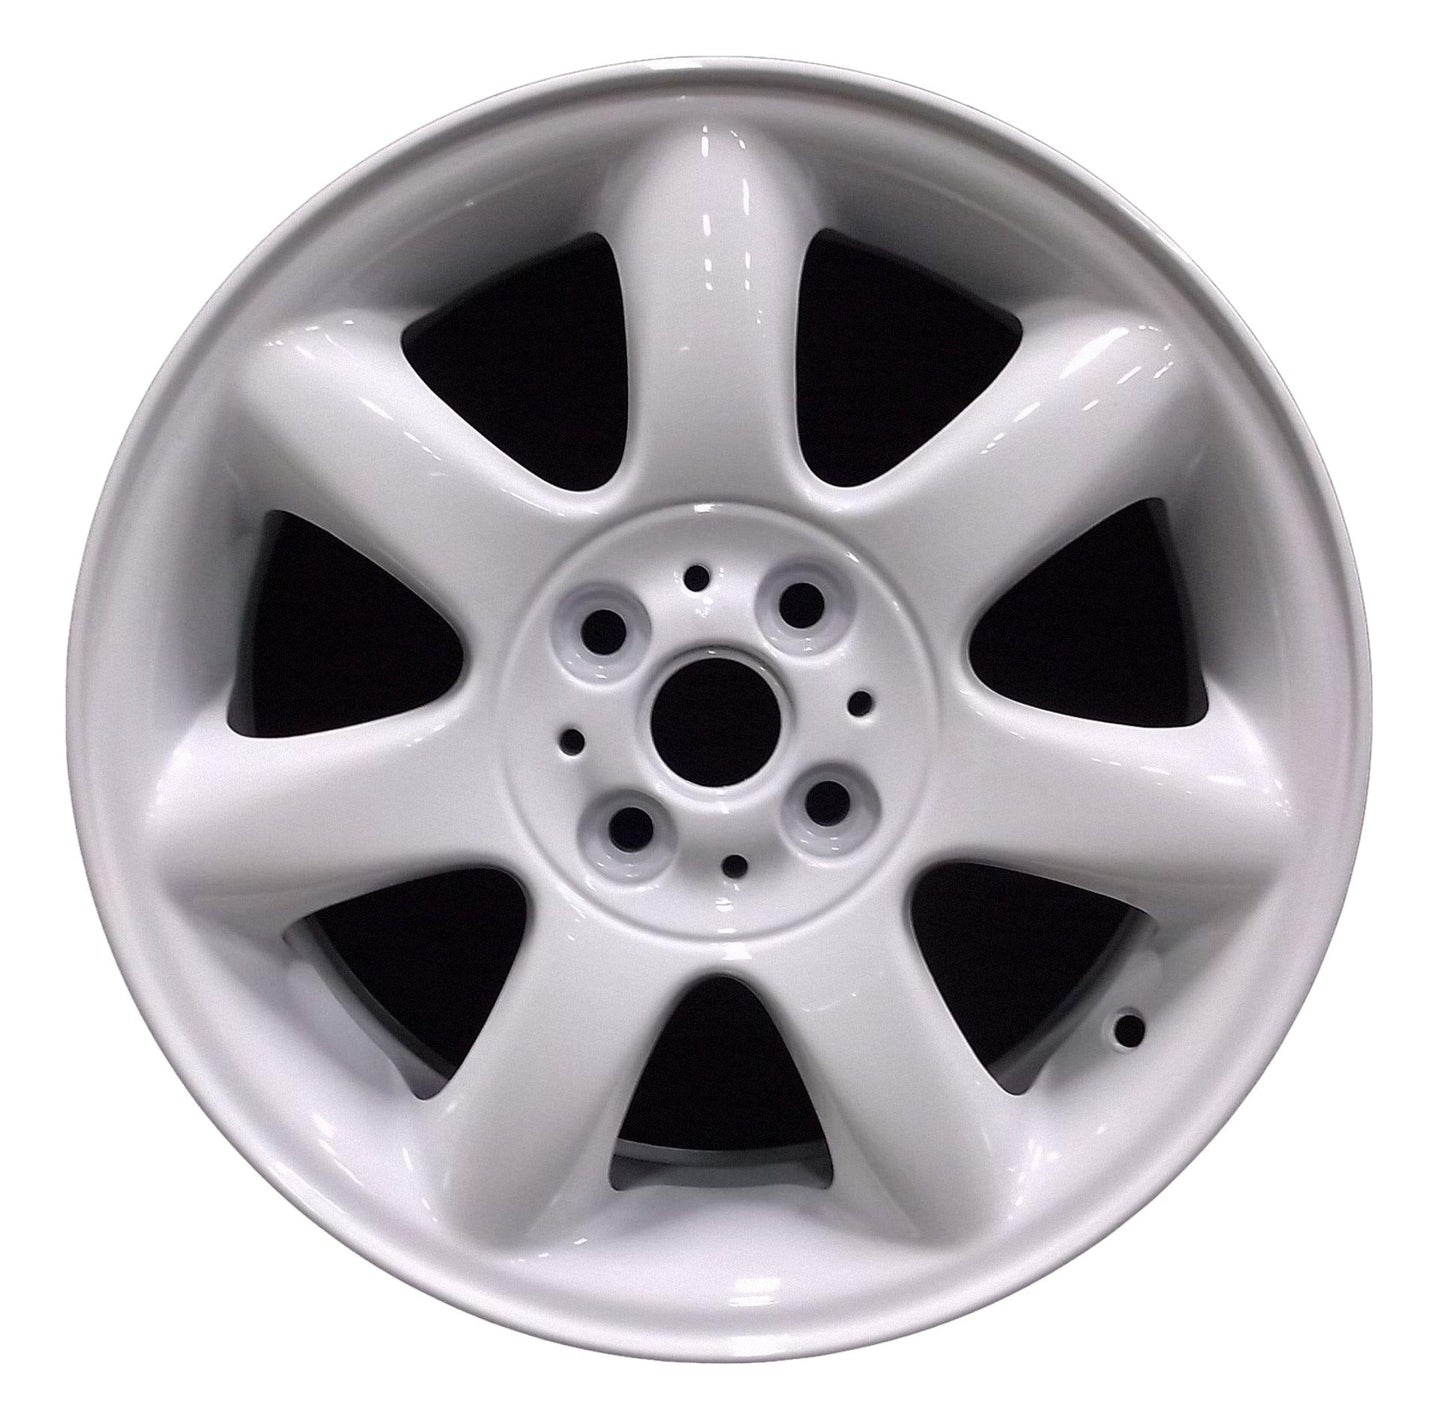 MINI Cooper Coupe  2011, 2012, 2013, 2014 Factory OEM Car Wheel Size 16x6.5 Alloy WAO.59570.PW01.FF